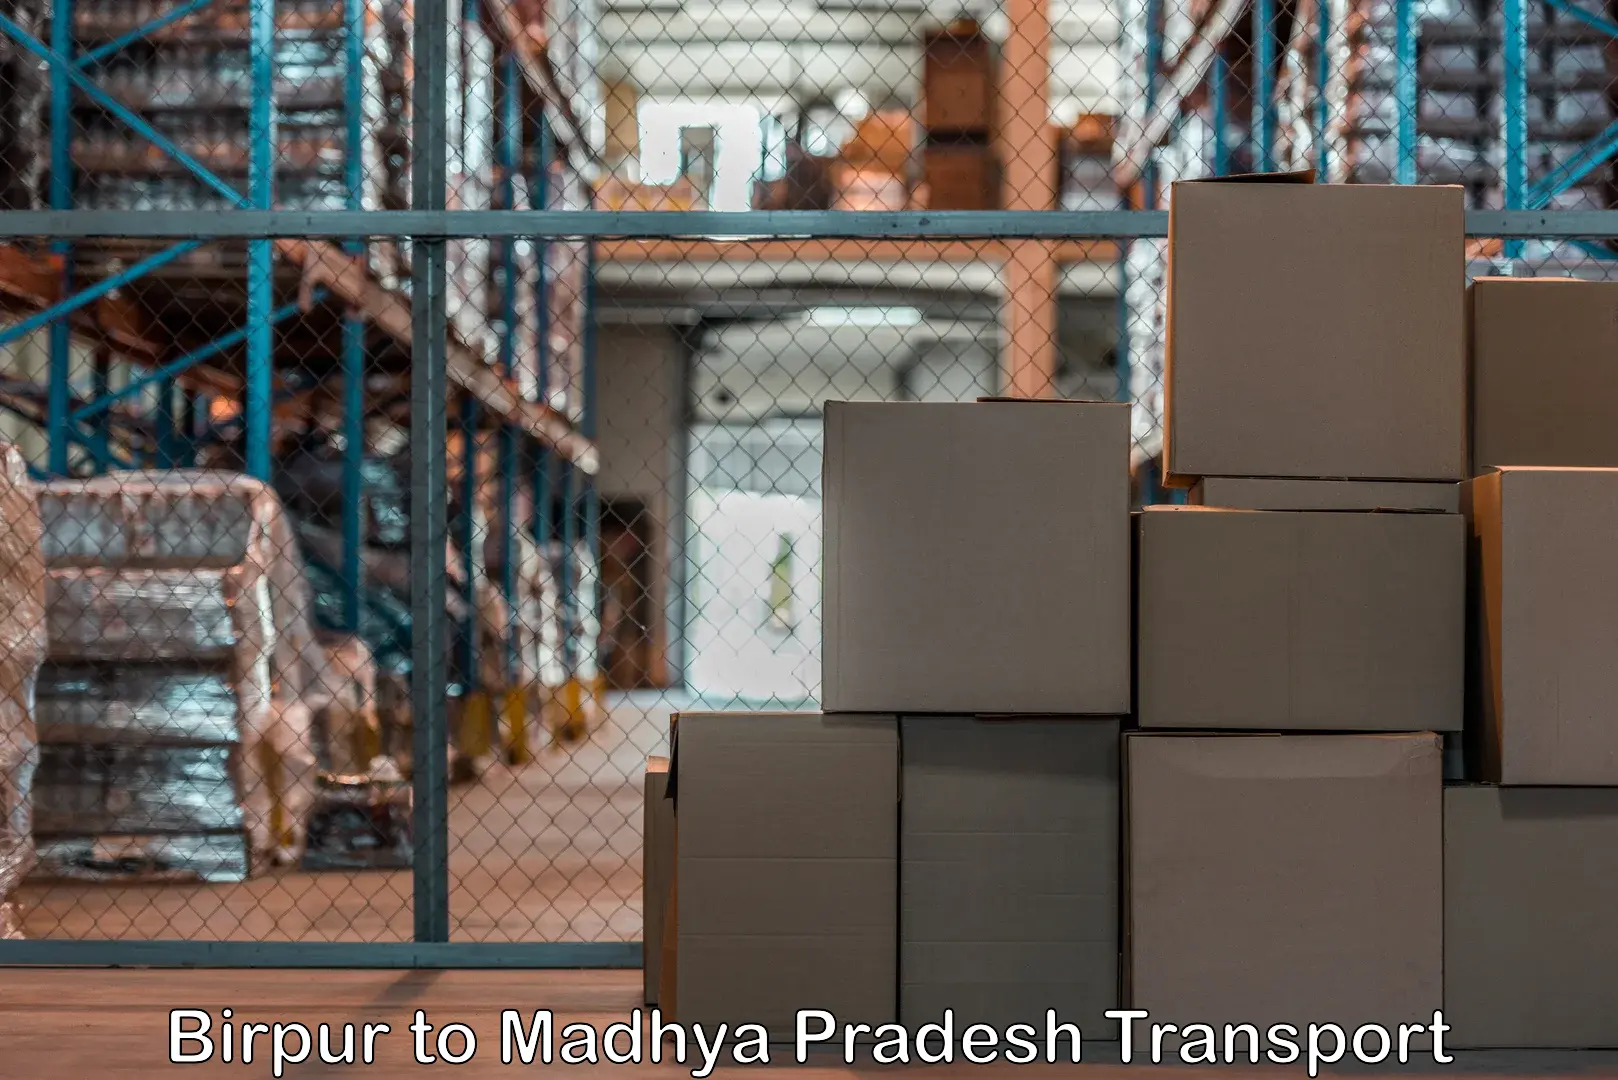 Package delivery services in Birpur to Neemuch